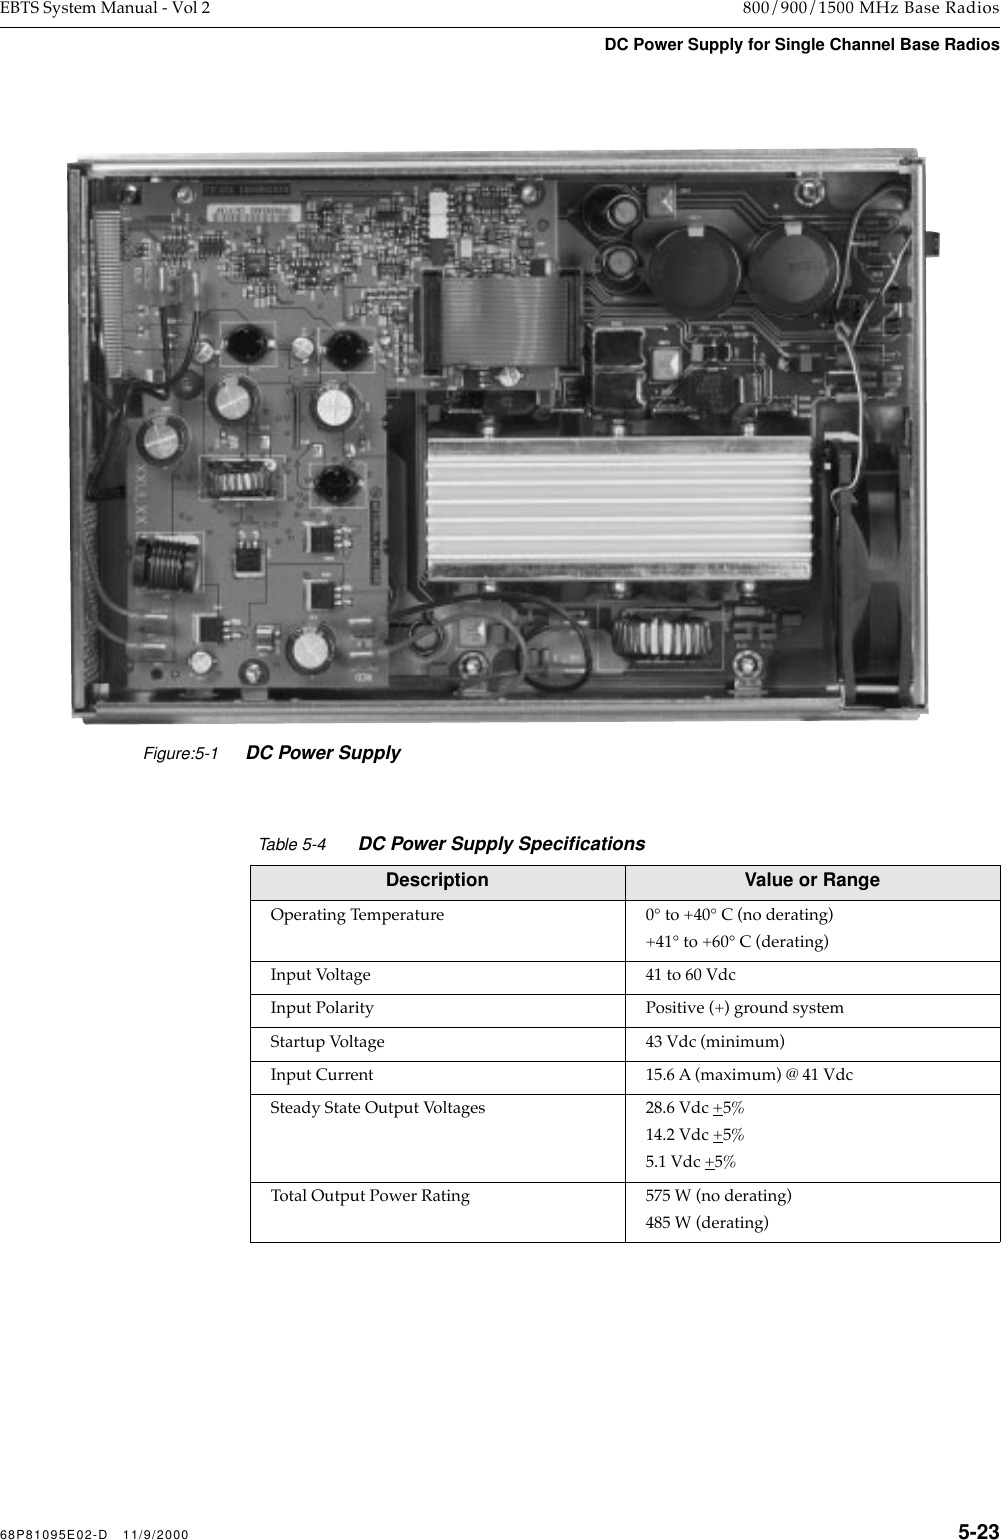  68P81095E02-D   11/9/2000 5-23 EBTS System Manual - Vol 2 800/900/1500 MHz Base Radios DC Power Supply for Single Channel Base Radios   Table 5-4 DC Power Supply Speciﬁcations   Description Value or Range Operating Temperature 0¡ to +40¡ C (no derating)+41¡ to +60¡ C (derating)Input Voltage 41 to 60 VdcInput Polarity Positive (+) ground systemStartup Voltage 43 Vdc (minimum)Input Current 15.6 A (maximum) @ 41 VdcSteady State Output Voltages 28.6 Vdc +5%14.2 Vdc +5%5.1 Vdc +5%Total Output Power Rating 575 W (no derating)485 W (derating)Figure:5-1DC Power Supply 